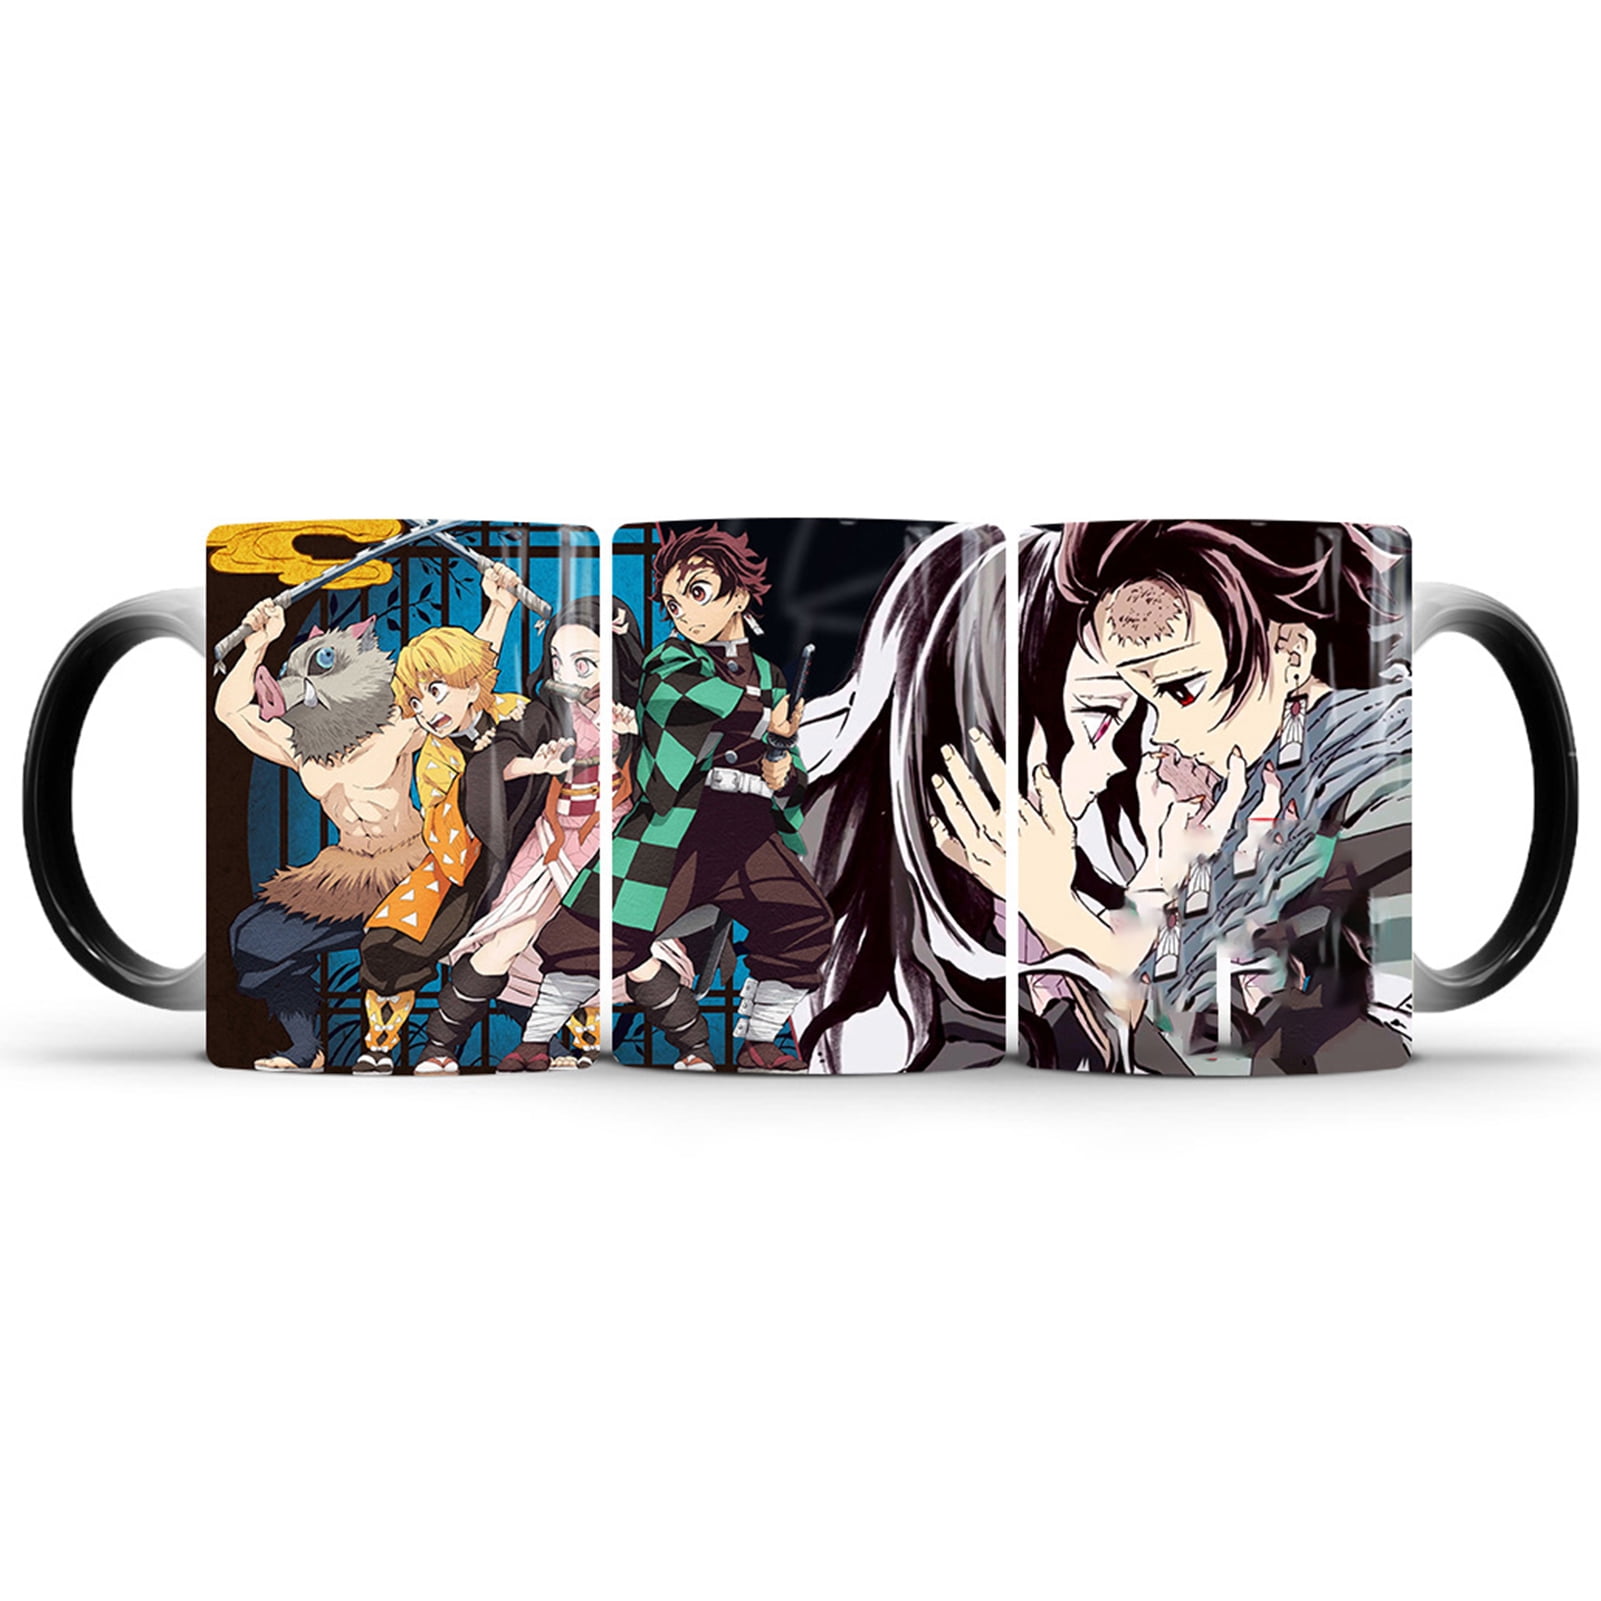 Color Changing Heat Reactive Coffee Mug, Details about   Dragon Ball Mugs 